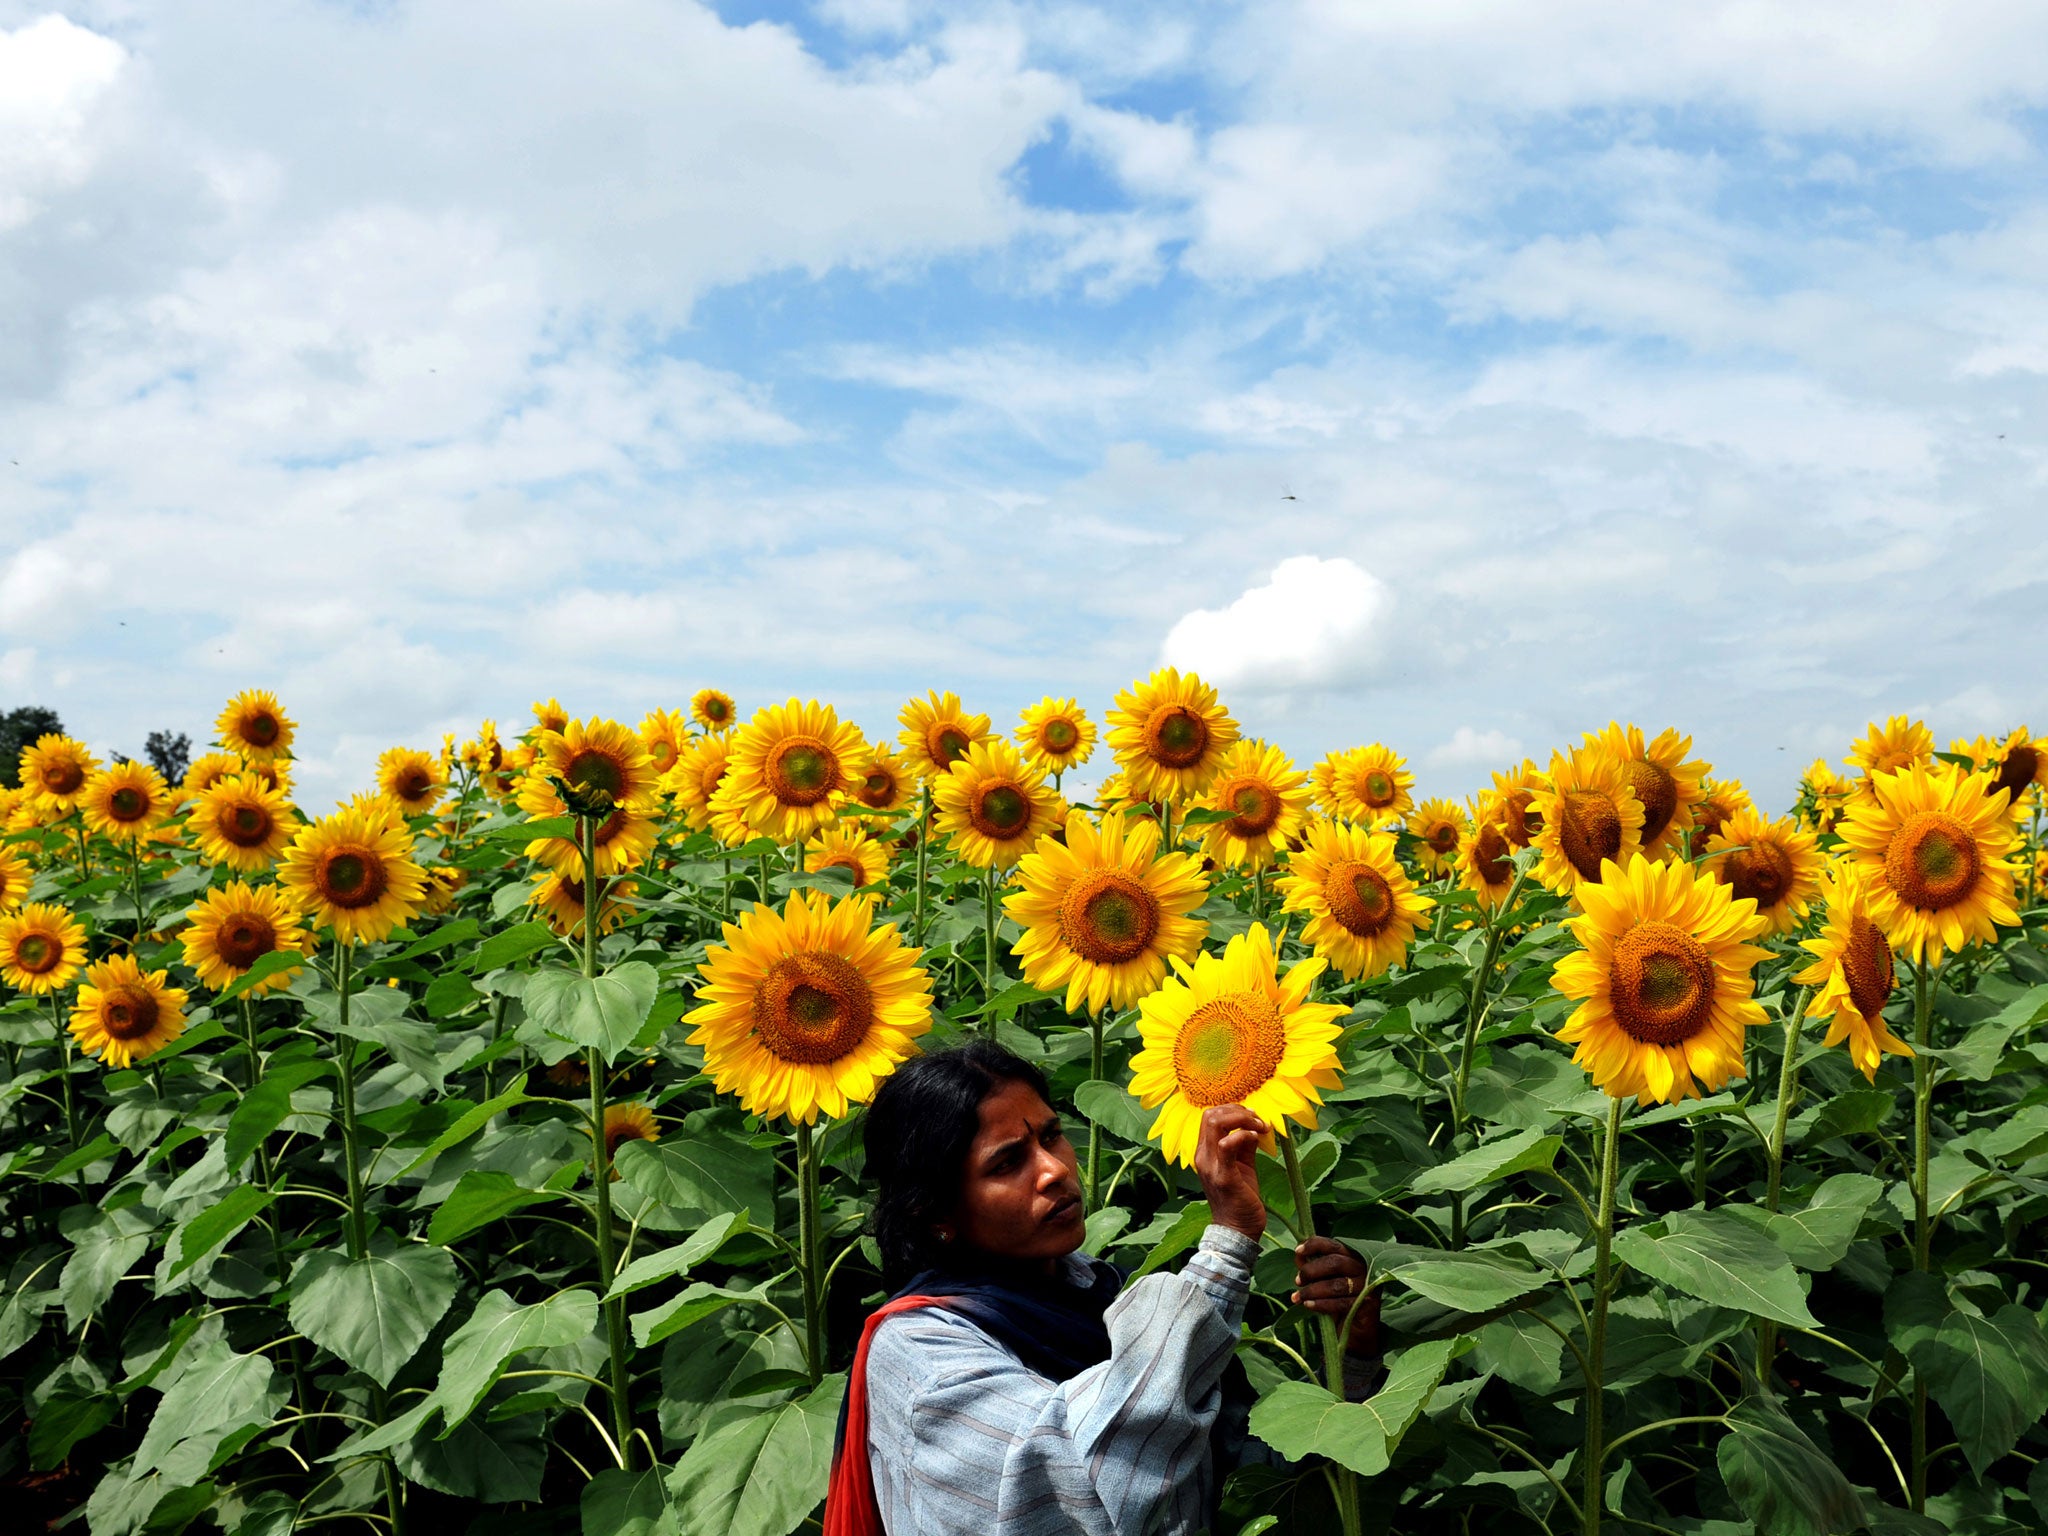 A farmer tends sunflowers, one of the crops in the project